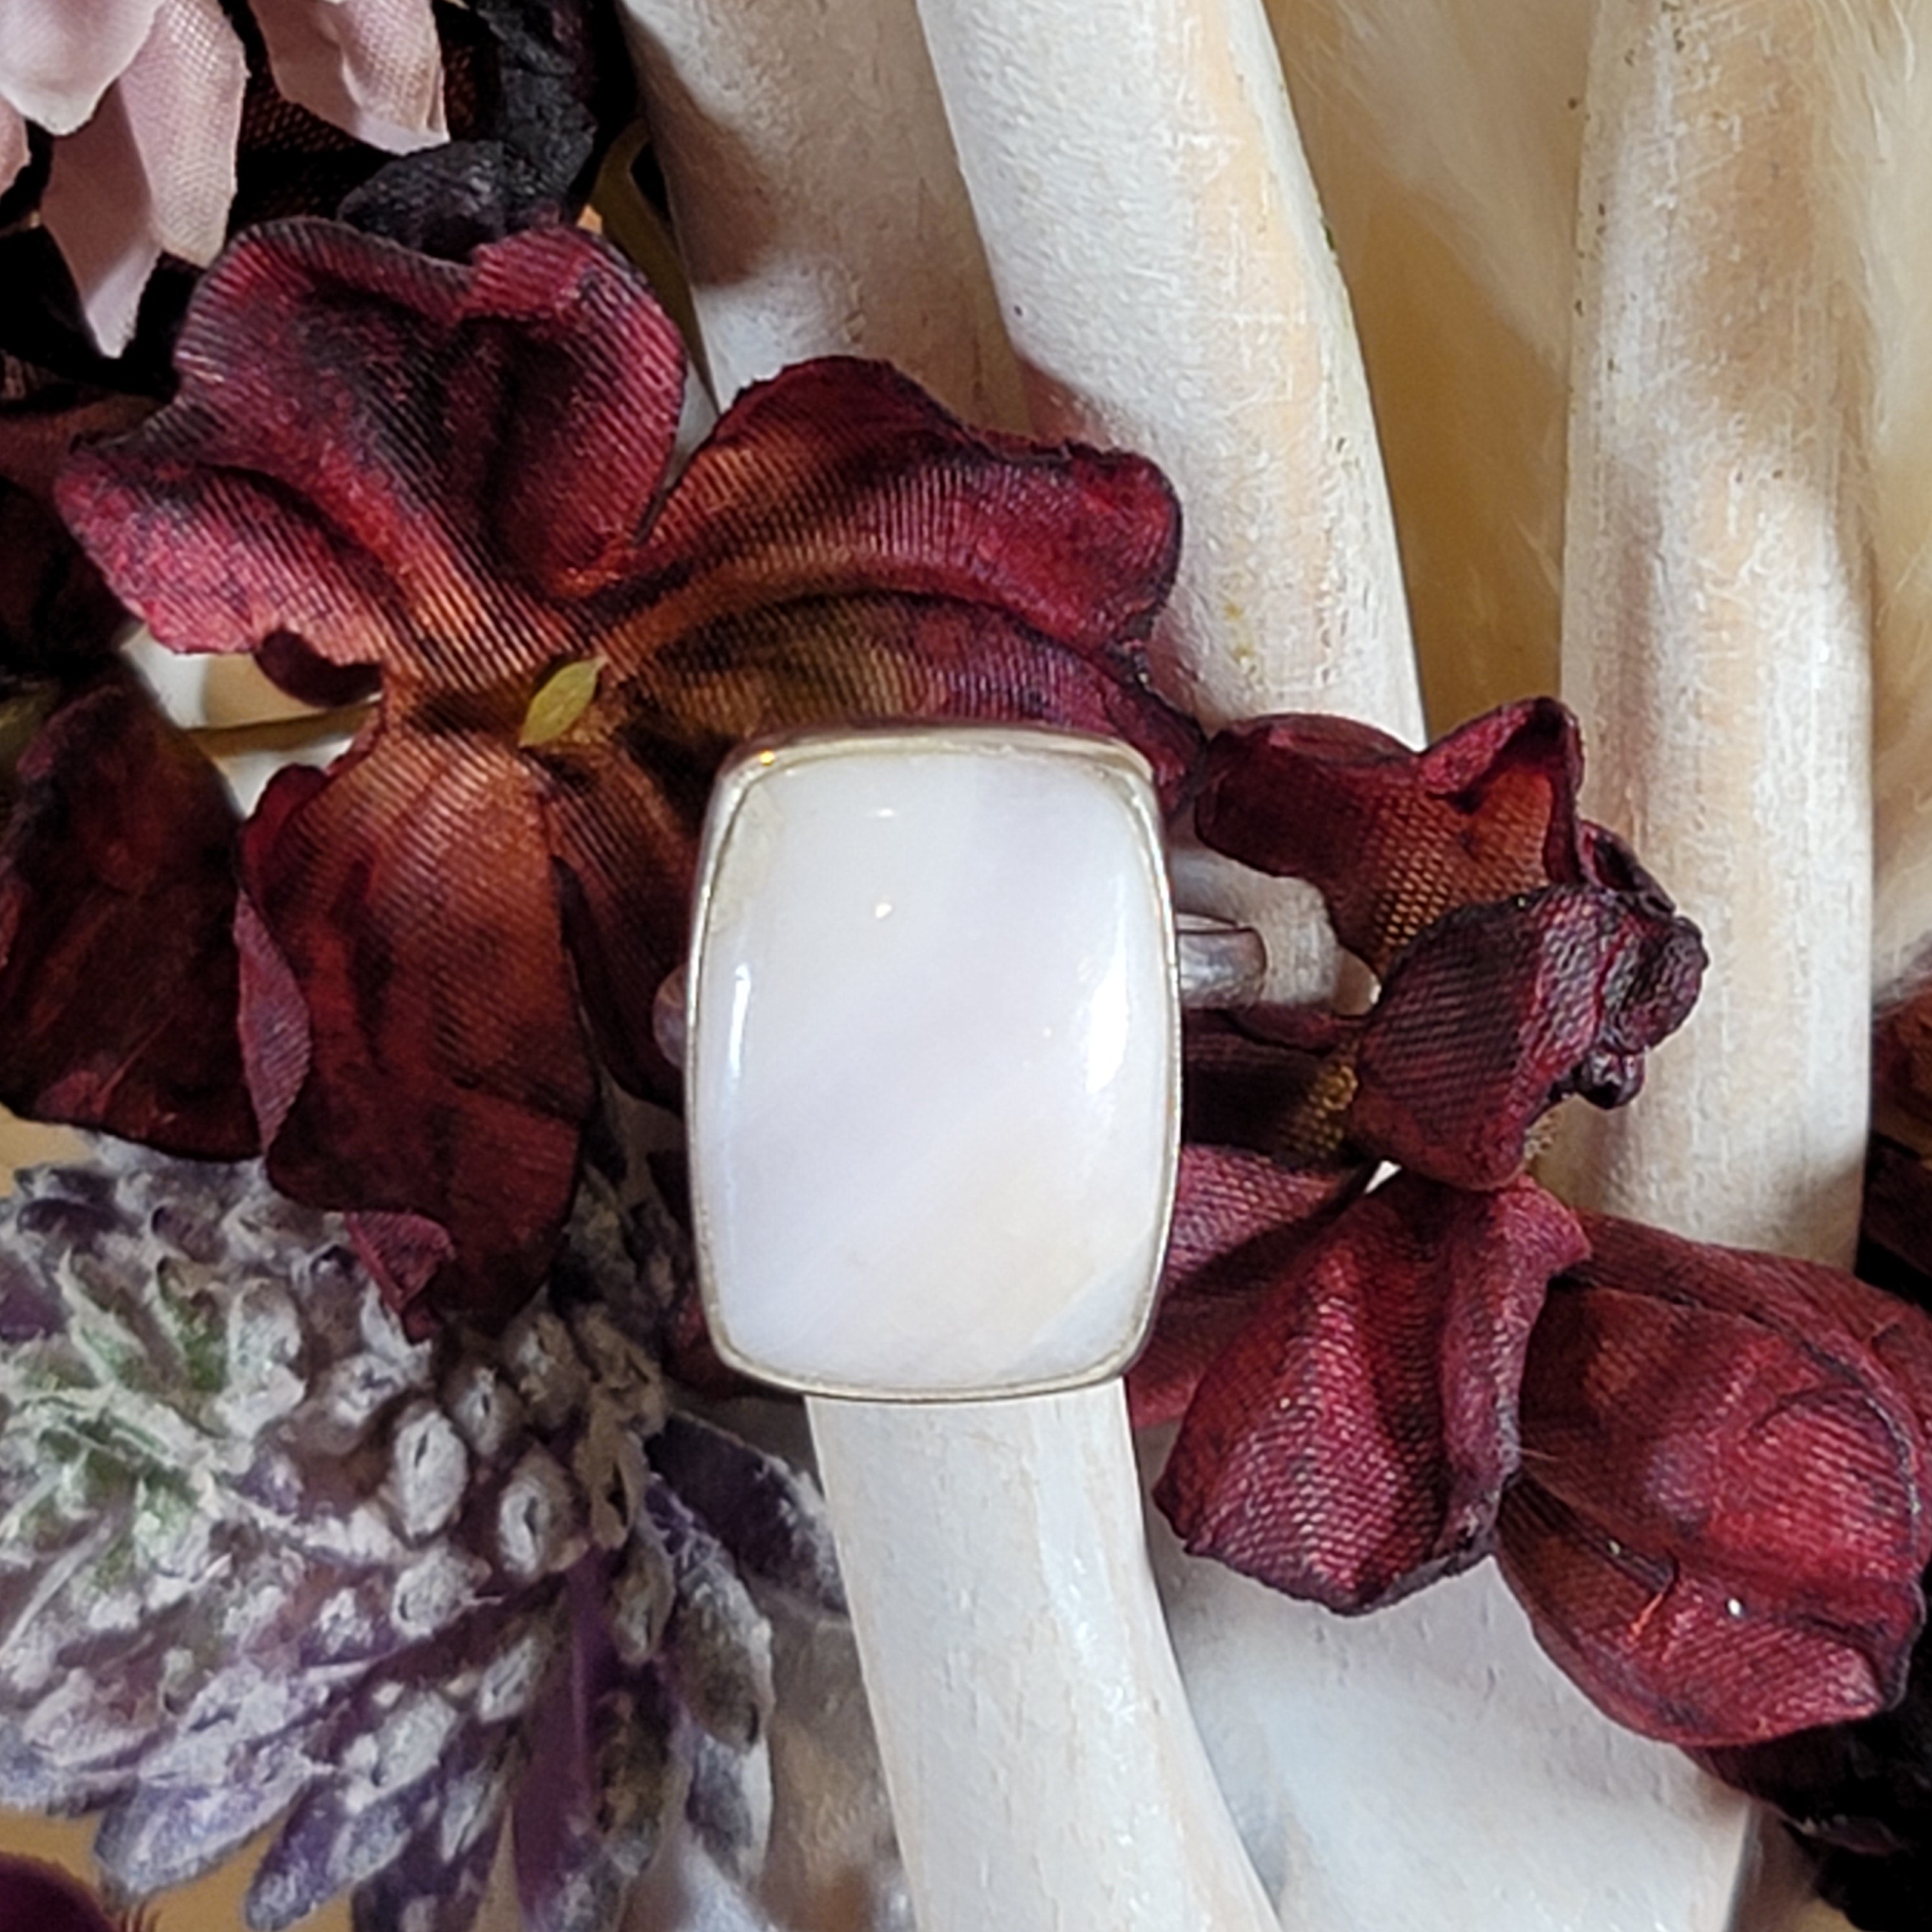 Pink Calcite Adjustable Ring .925 Silver for Compassion, Conflict Resolution and Emotional Healing